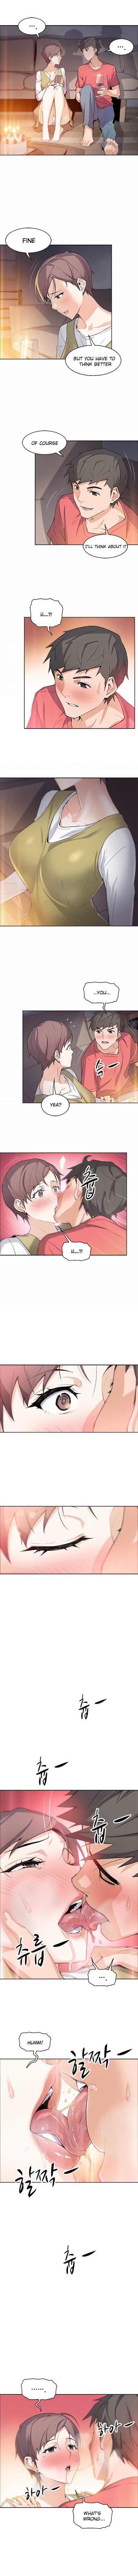 Young Tits Housekeeper [Neck Pillow, Paper] Ch.30/49 [English] [Manhwa PDF] Nasty Free Porn - Page 5